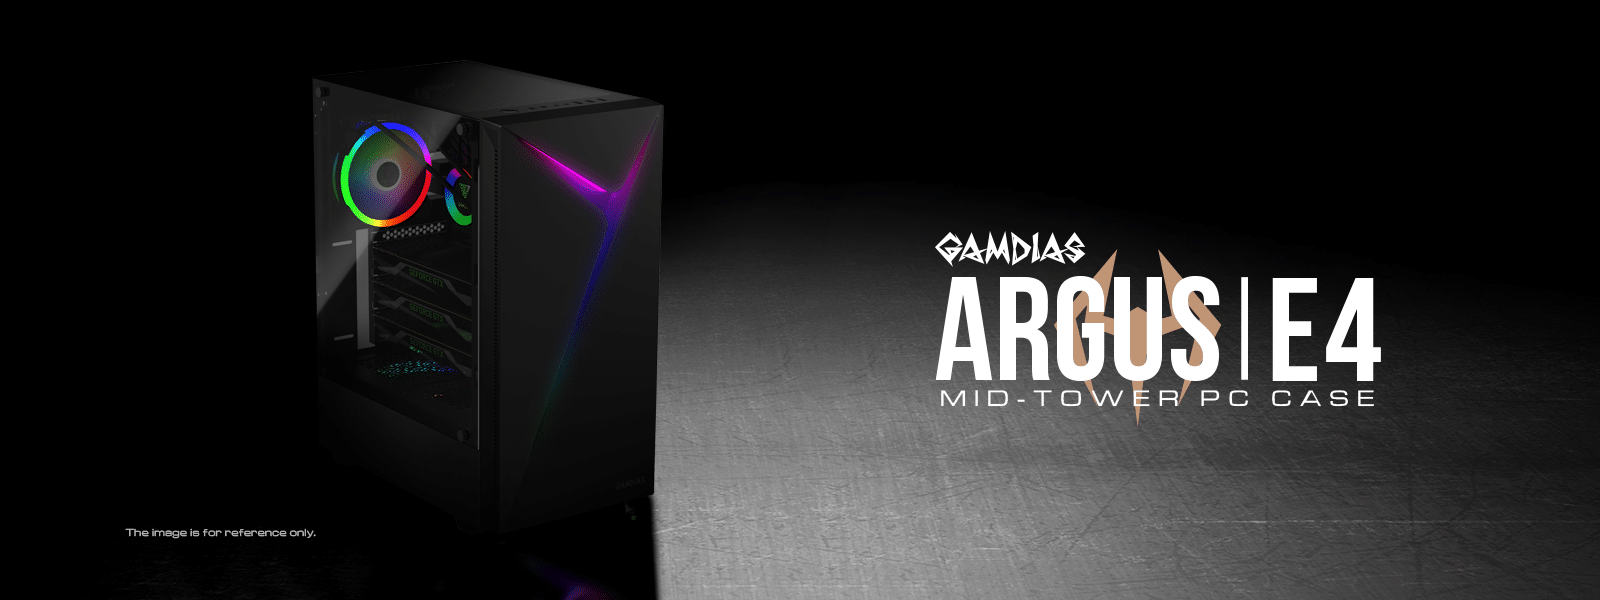 ARGUS E4 has a straight concept of the design: A Mid -tower case, the front eye-catching rainbow RGB lighting and panoramic tempered glass side panel. All together, they add up to show off a unique style of your own.”